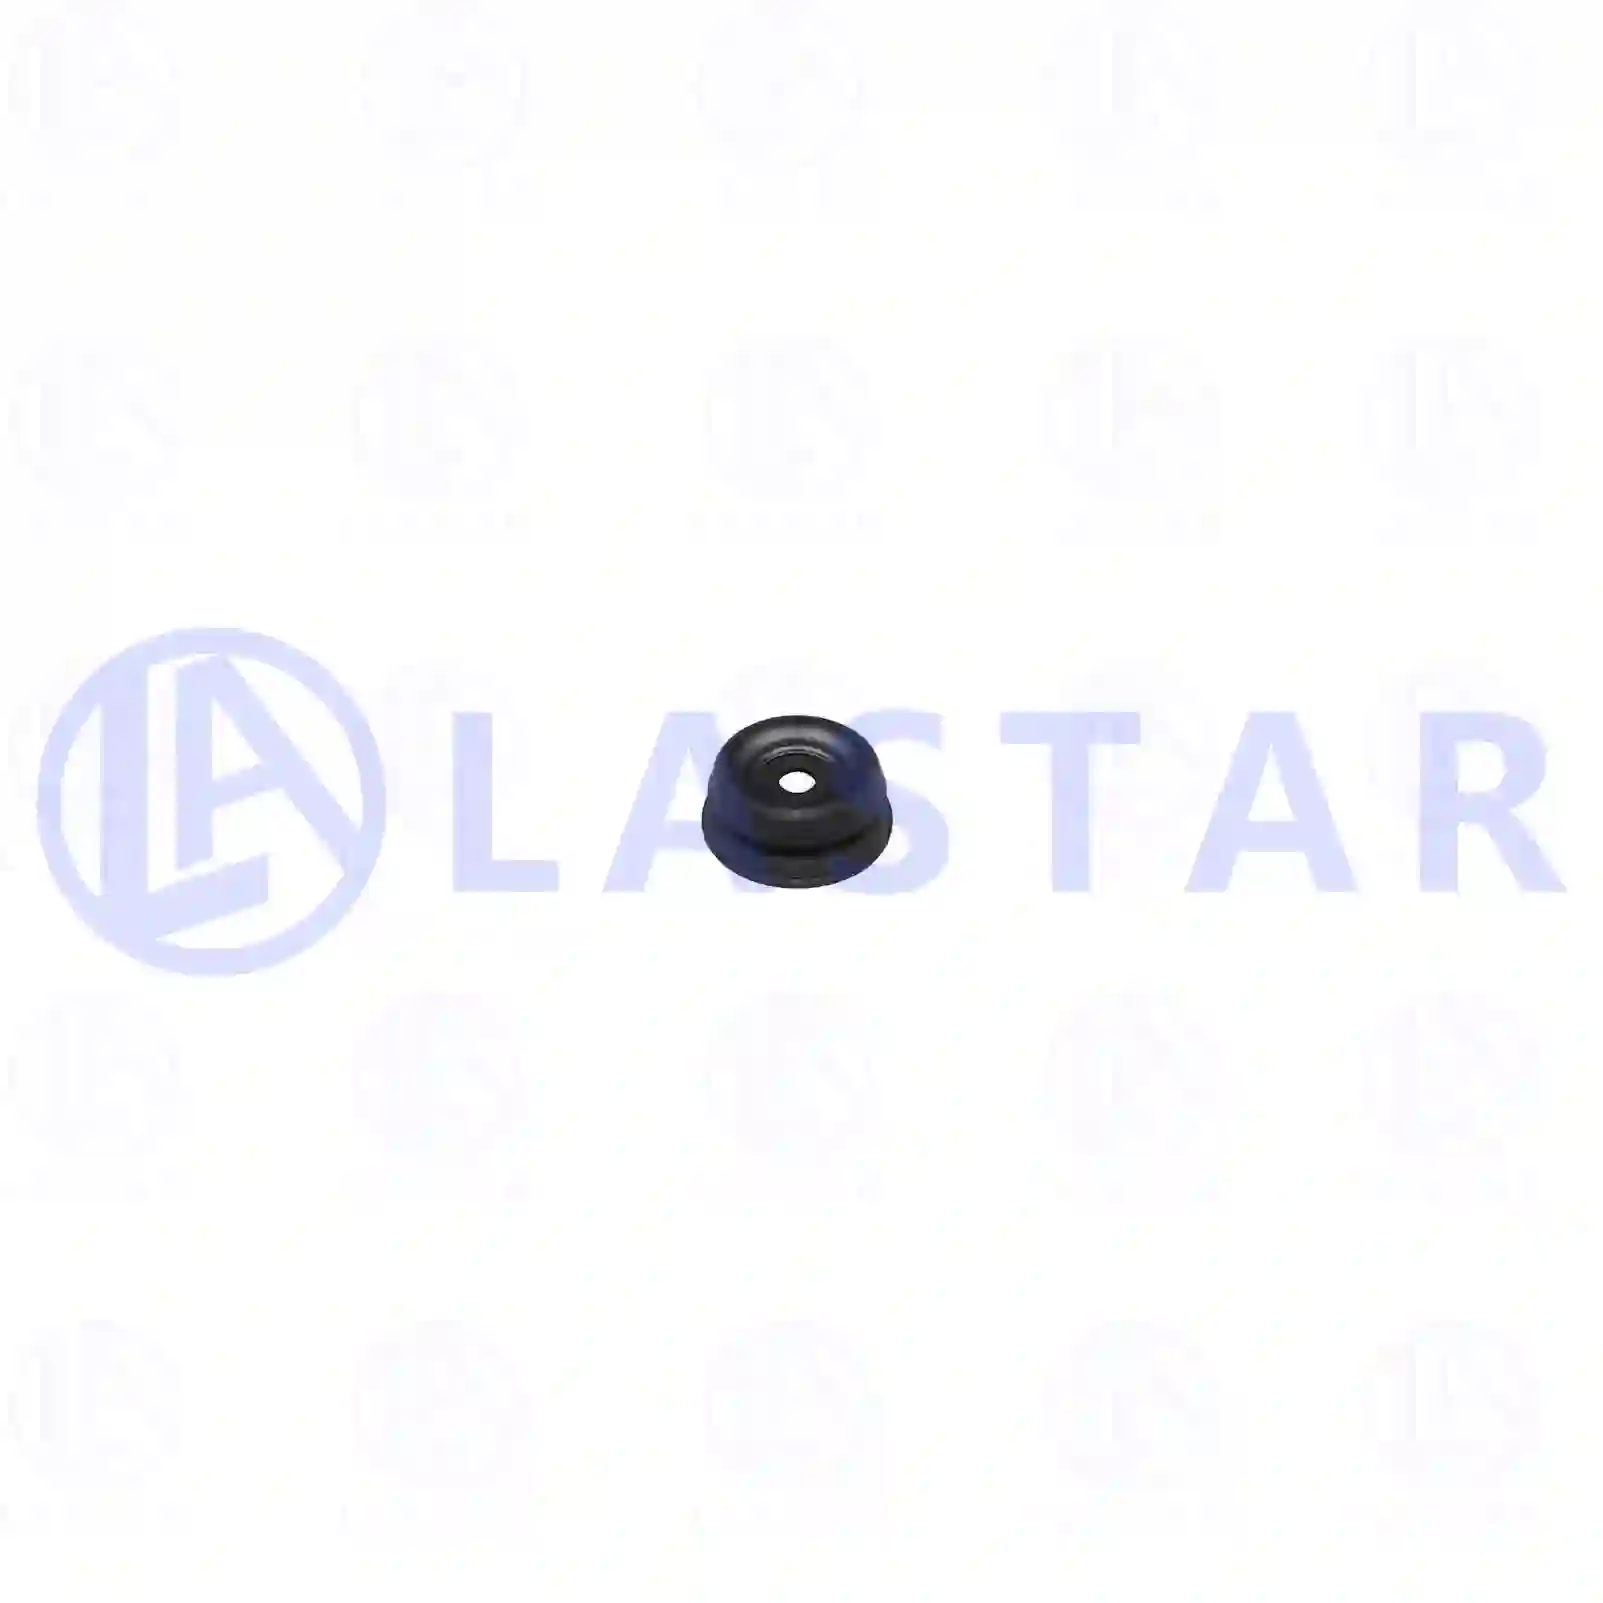 Rubber bushing, shock absorber, 77735102, 9013230085, 2D0407183, ZG41477-0008 ||  77735102 Lastar Spare Part | Truck Spare Parts, Auotomotive Spare Parts Rubber bushing, shock absorber, 77735102, 9013230085, 2D0407183, ZG41477-0008 ||  77735102 Lastar Spare Part | Truck Spare Parts, Auotomotive Spare Parts